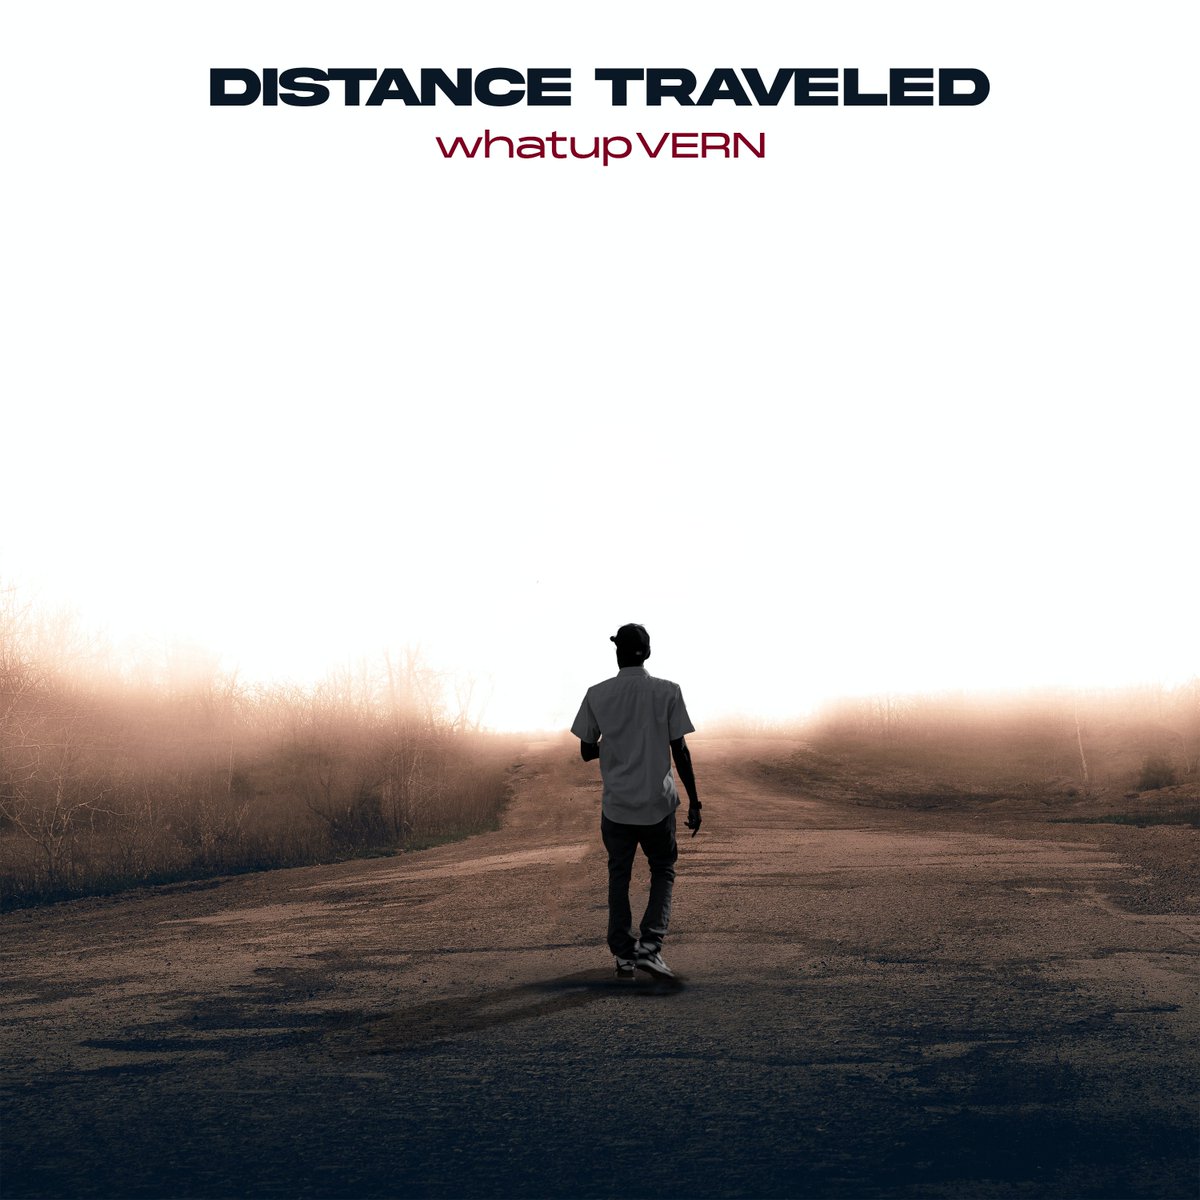 Just grabbed my copy (still want the vinyl) of #DistanceTraveled by @whatupvern can't wait to get into it 💪